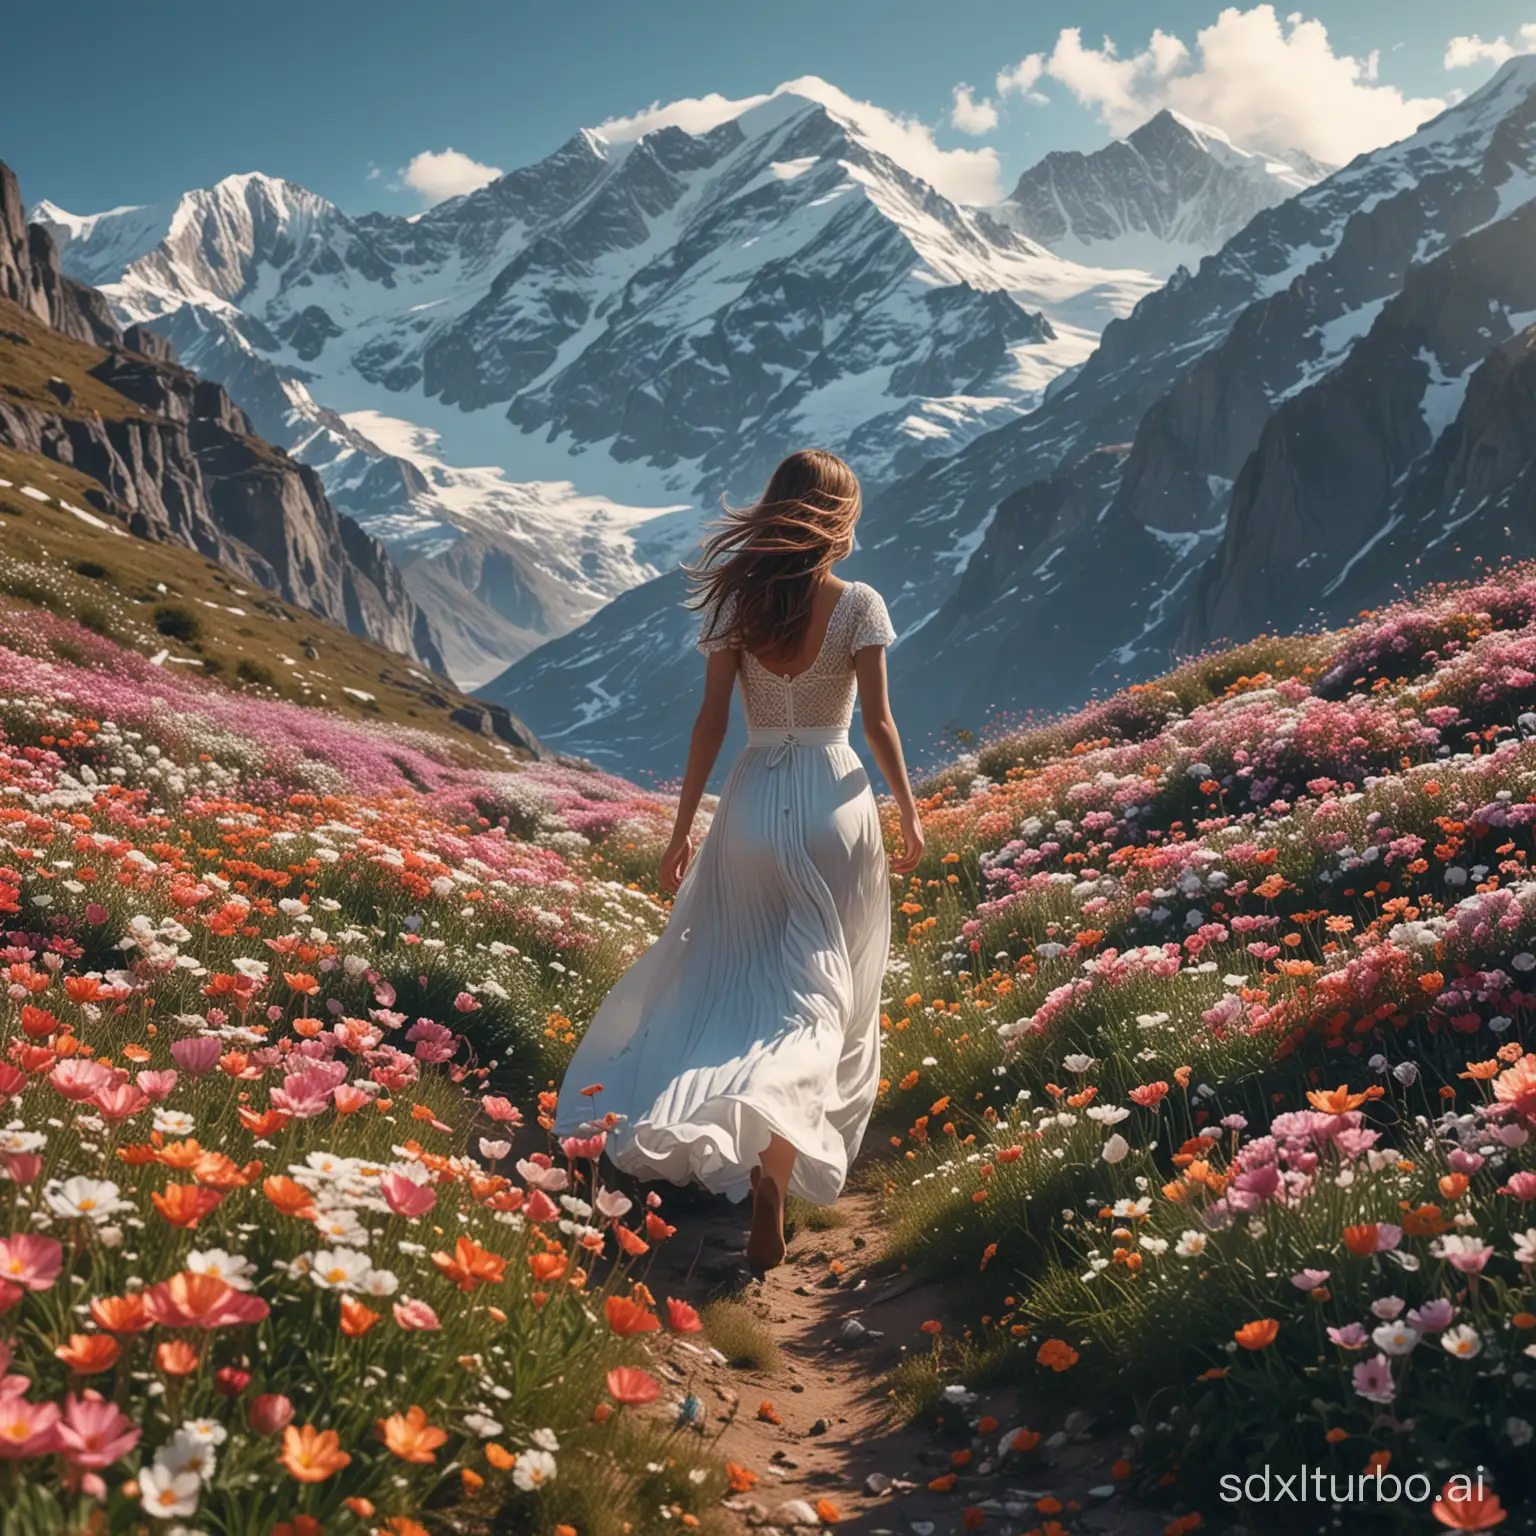 Under the majestic snow-capped mountains, amidst an endless sea of flowers, a beautiful girl in a long skirt is running into the distance, captured by a telephoto lens, in 8K wallpaper quality, with a scene full of details and unparalleled beauty.